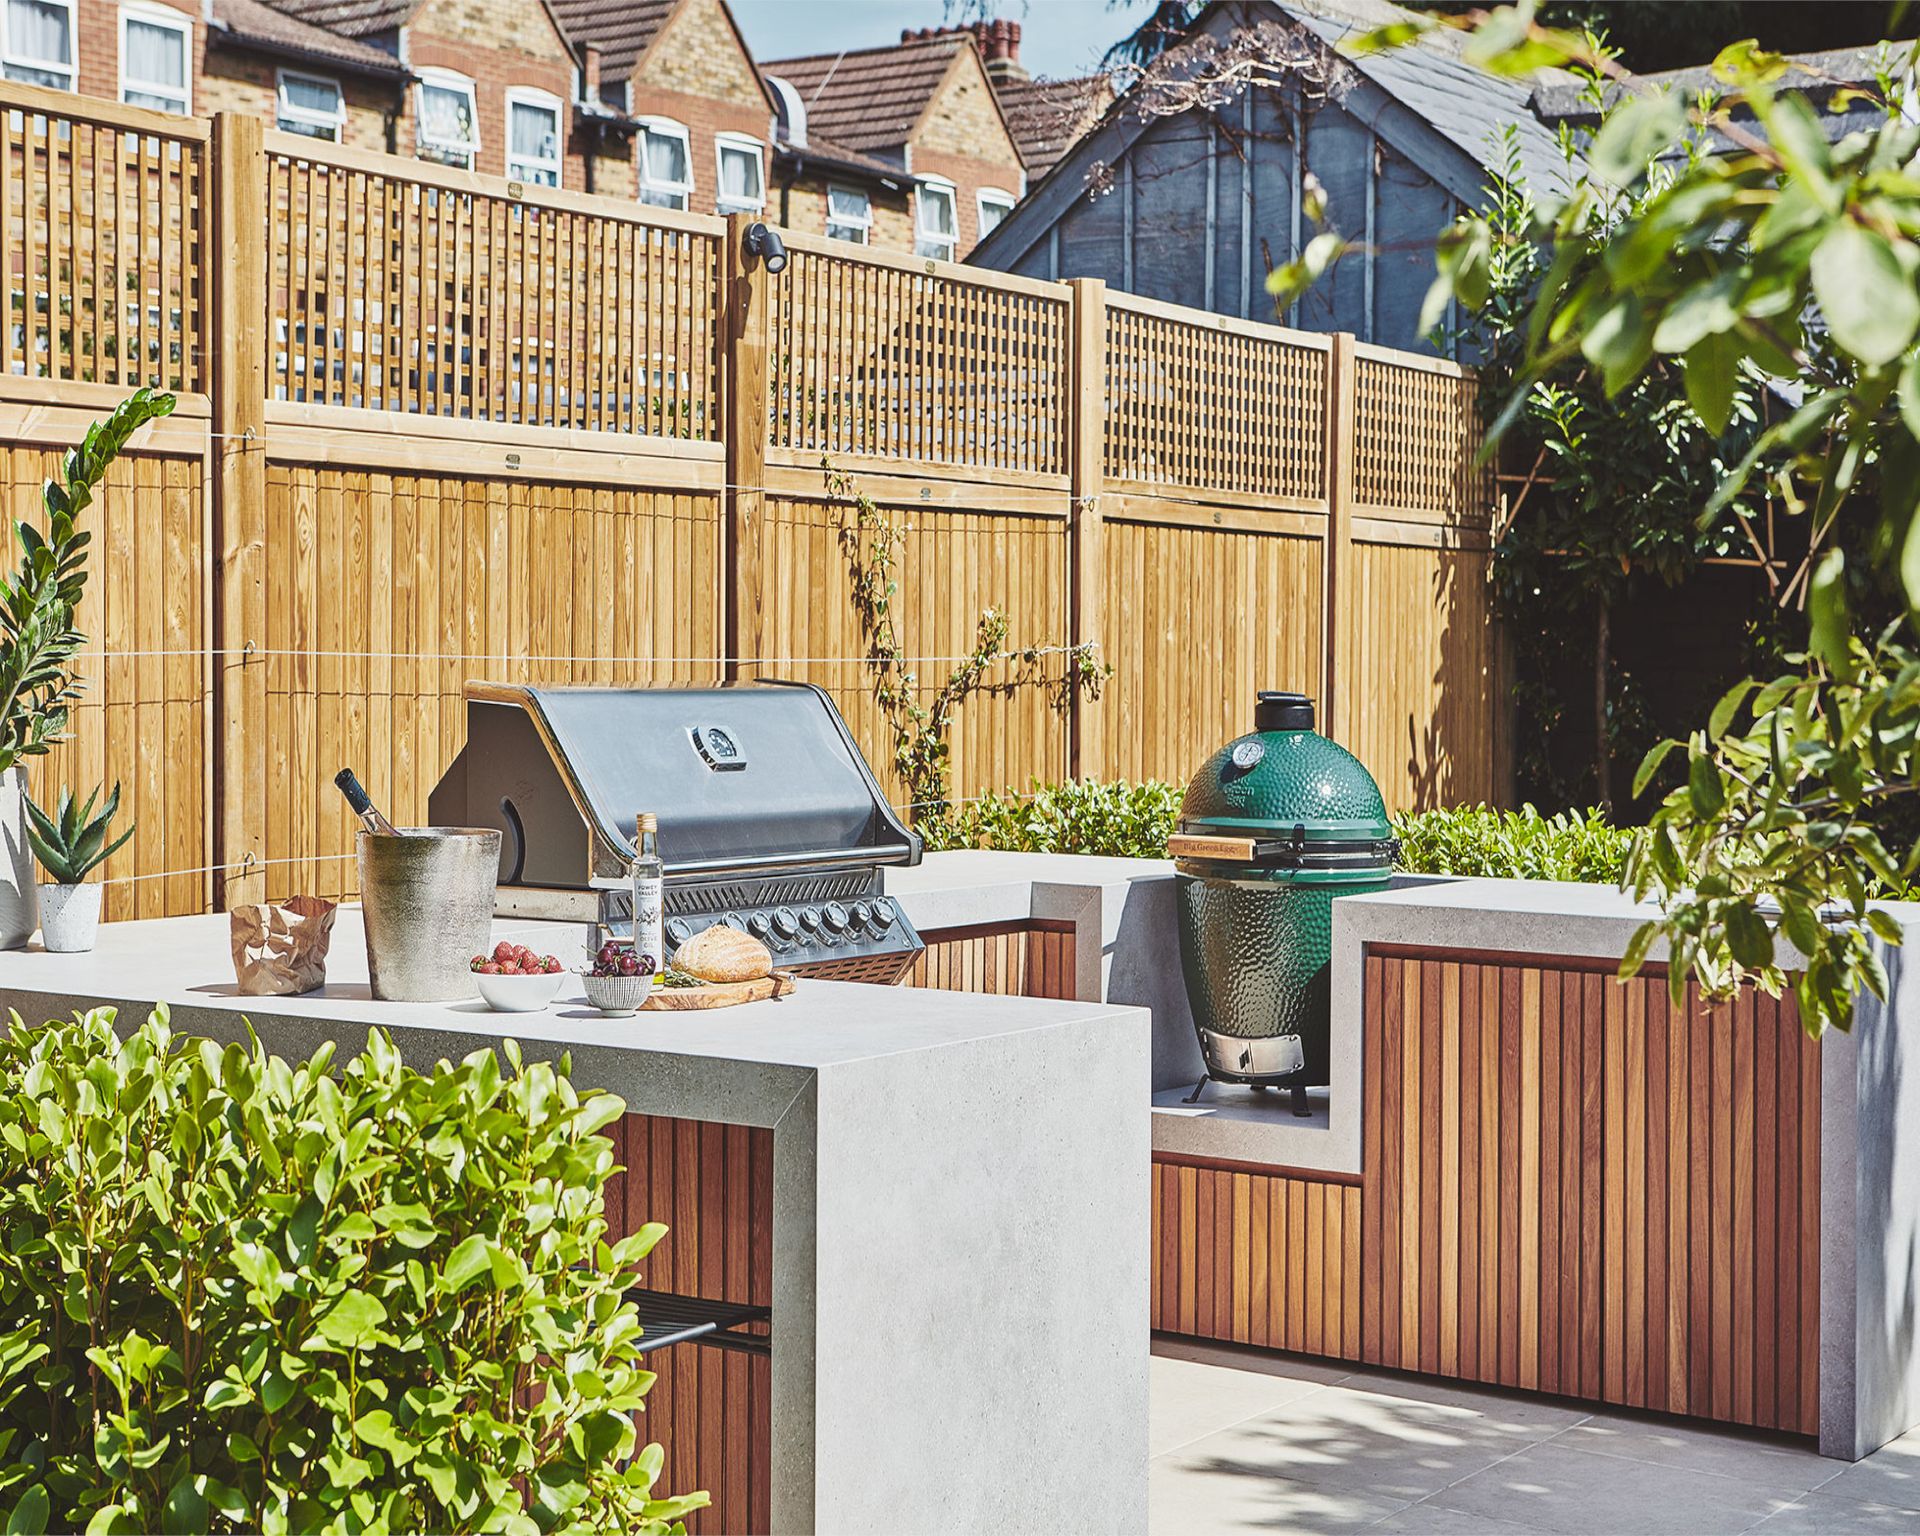 31 outdoor kitchen ideas for better backyard grilling